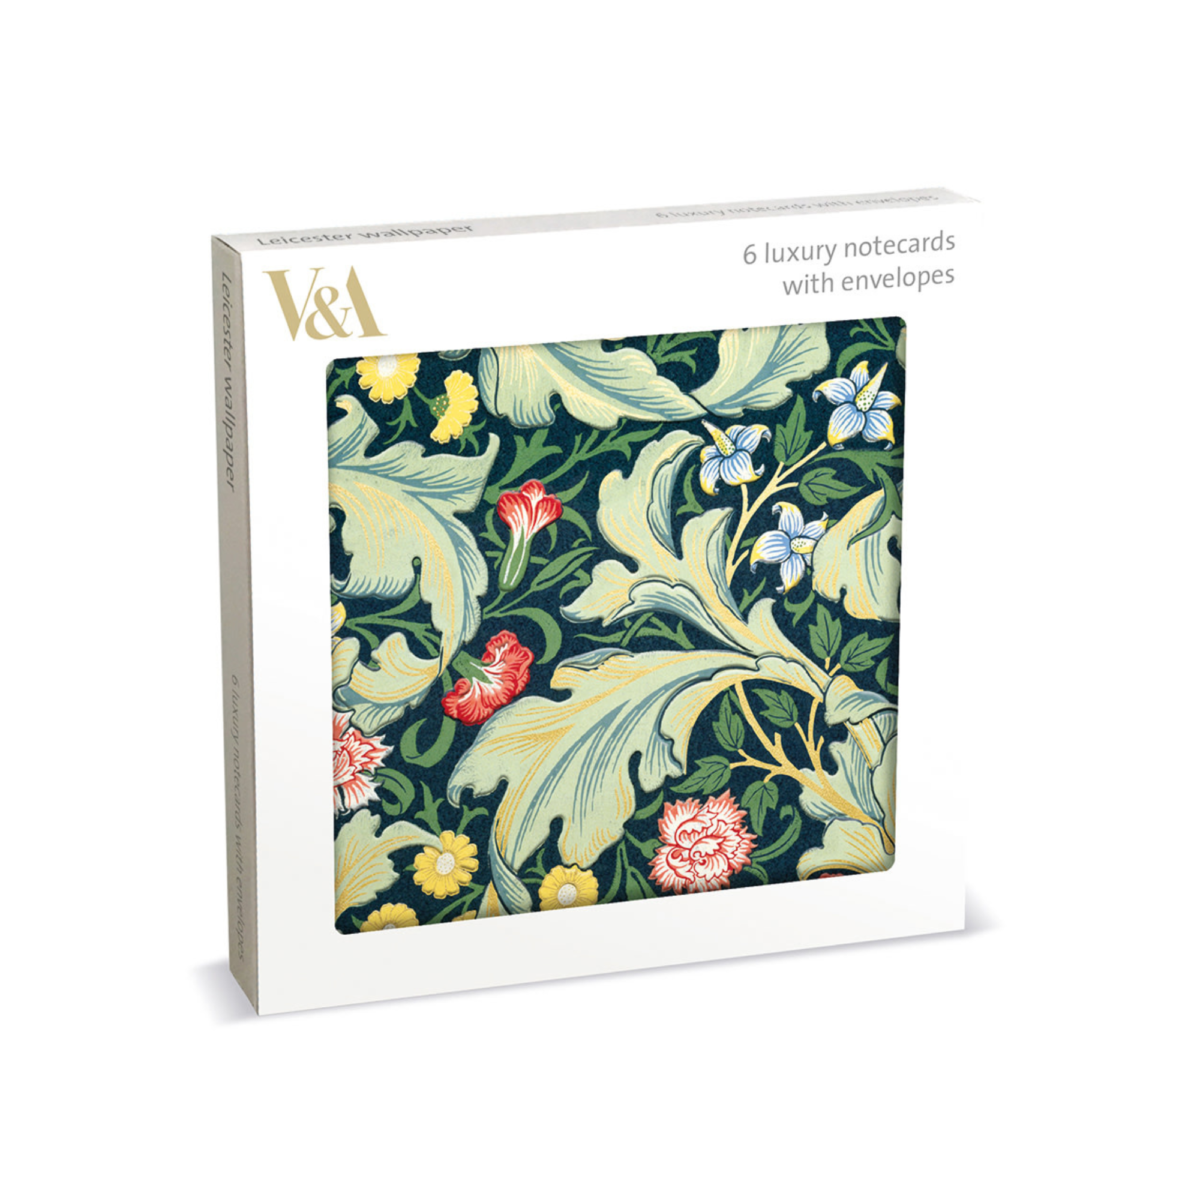 Image of Leicester Wallpaper Luxury Notecards with Envelopes